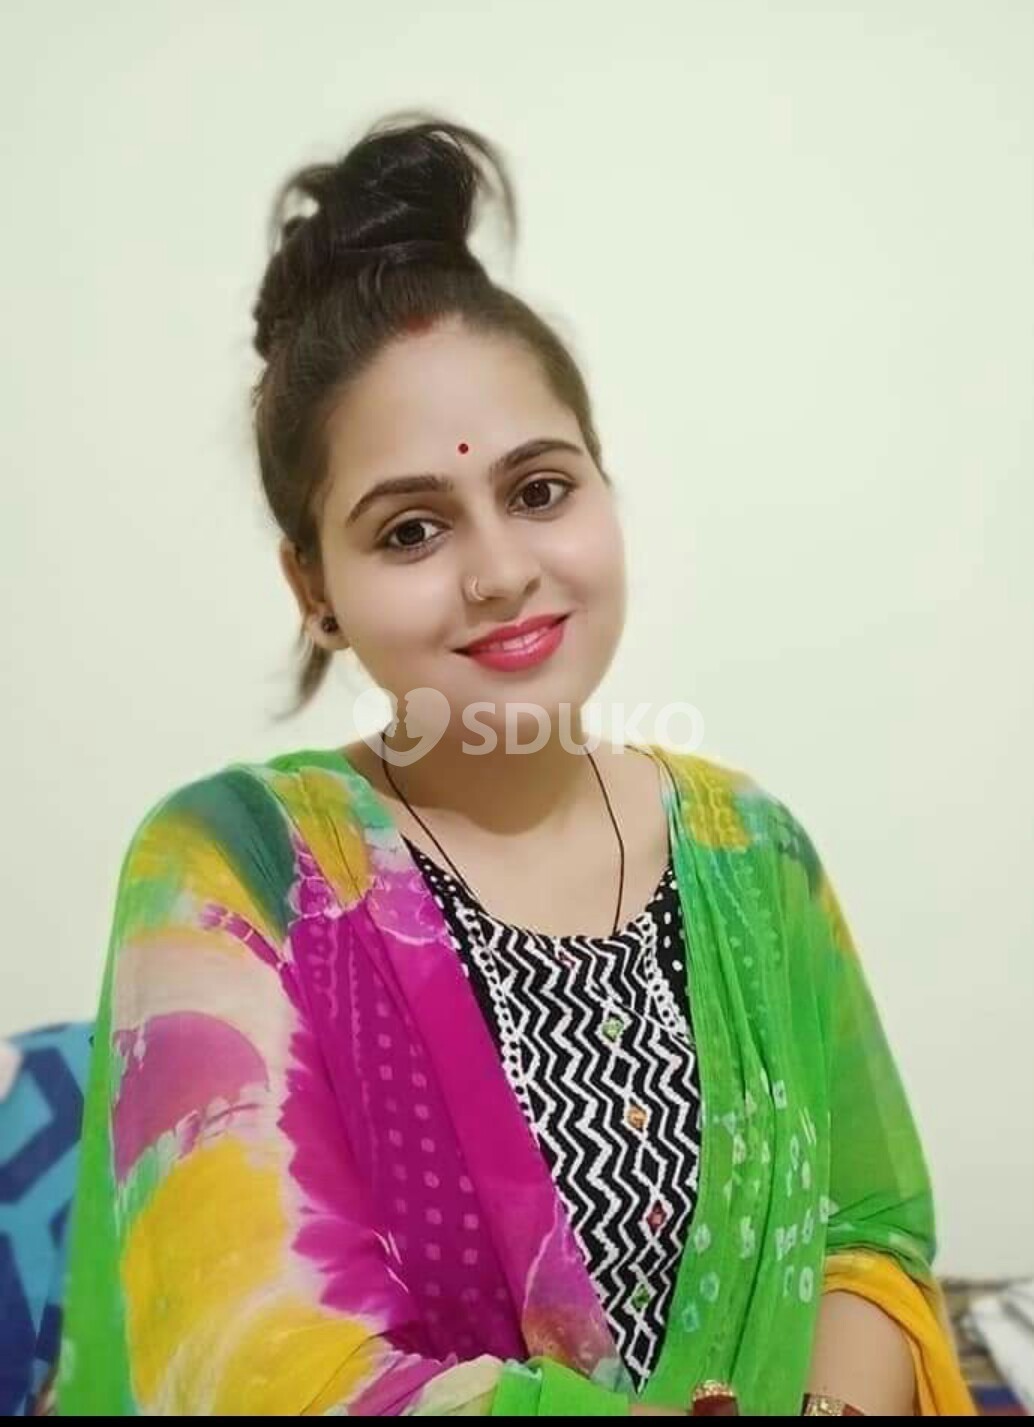 Hello Guys I am Pune janvi low cost unlimited hard sex call girls service Available